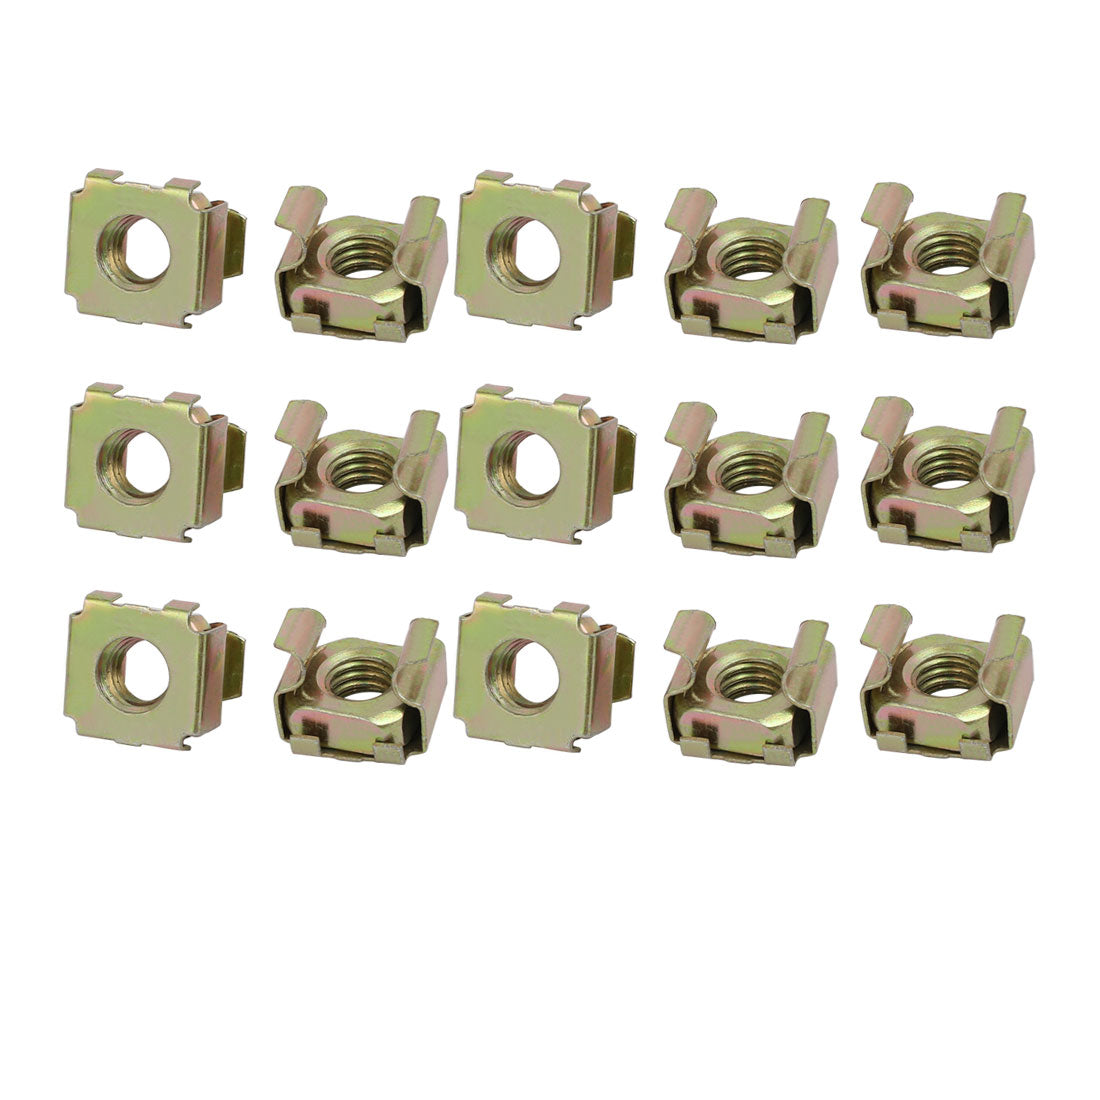 uxcell Uxcell 15pcs M8 Carbon Steel Captive Cage Nut Brass Tone for Server Shelf Cabinet